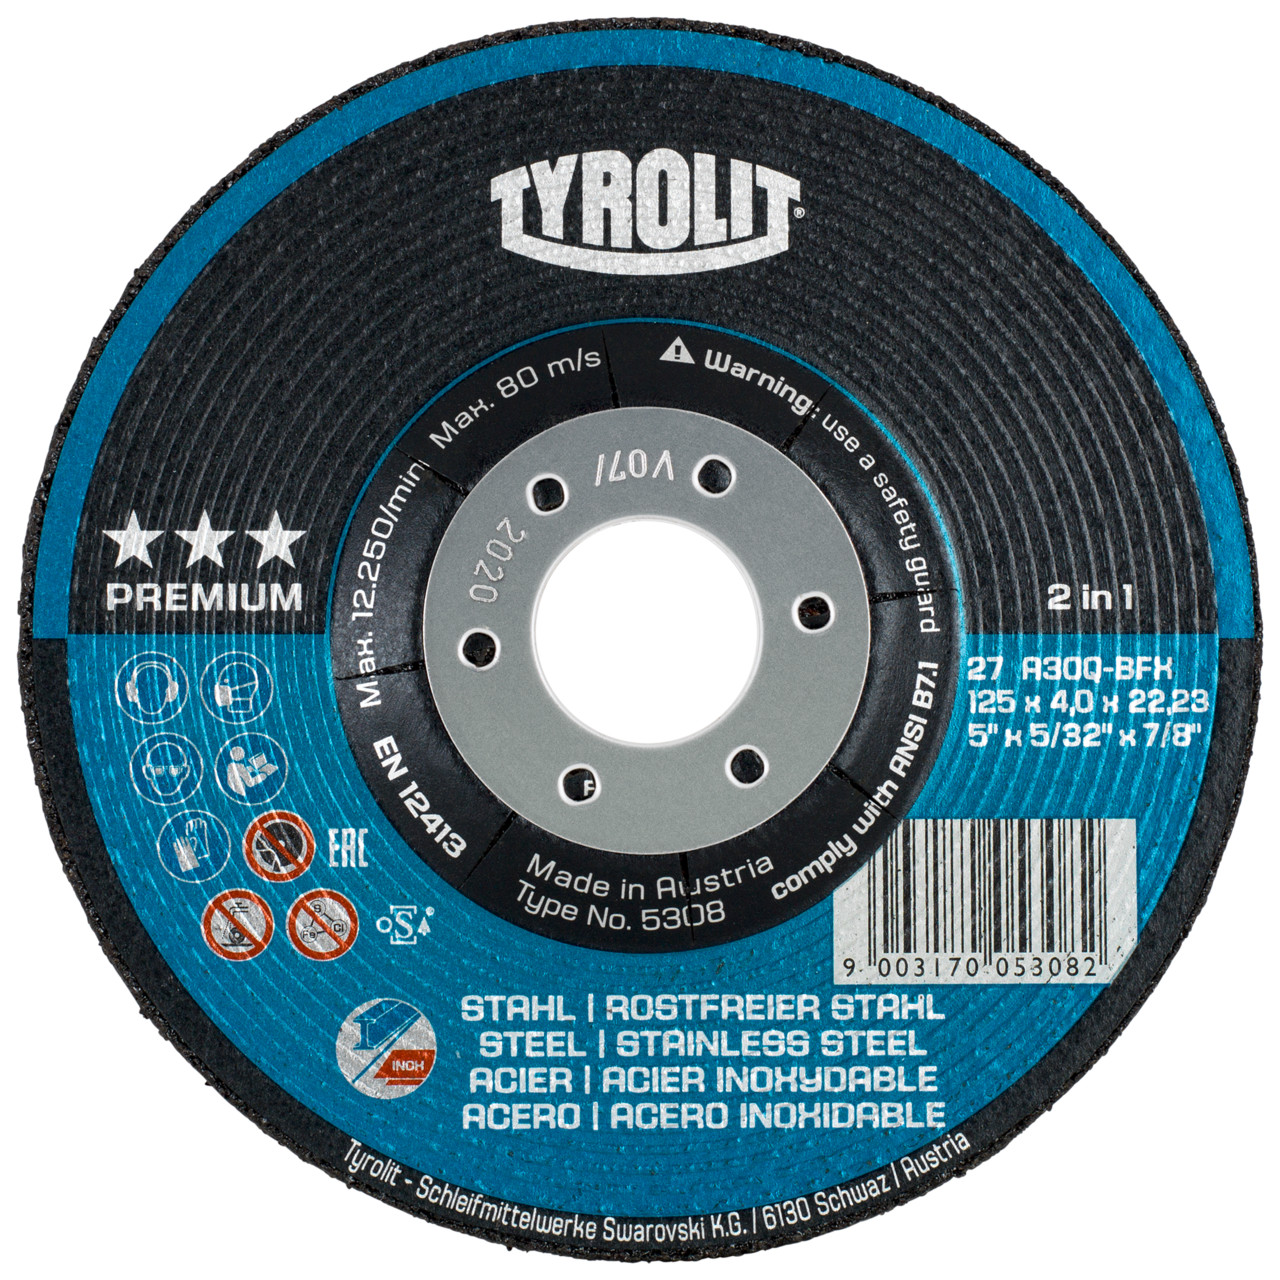 Tyrolit Roughing disc DxUxH 230x7x22.23 2in1 for steel and stainless steel, shape: 27 - offset version, Art. 34046134